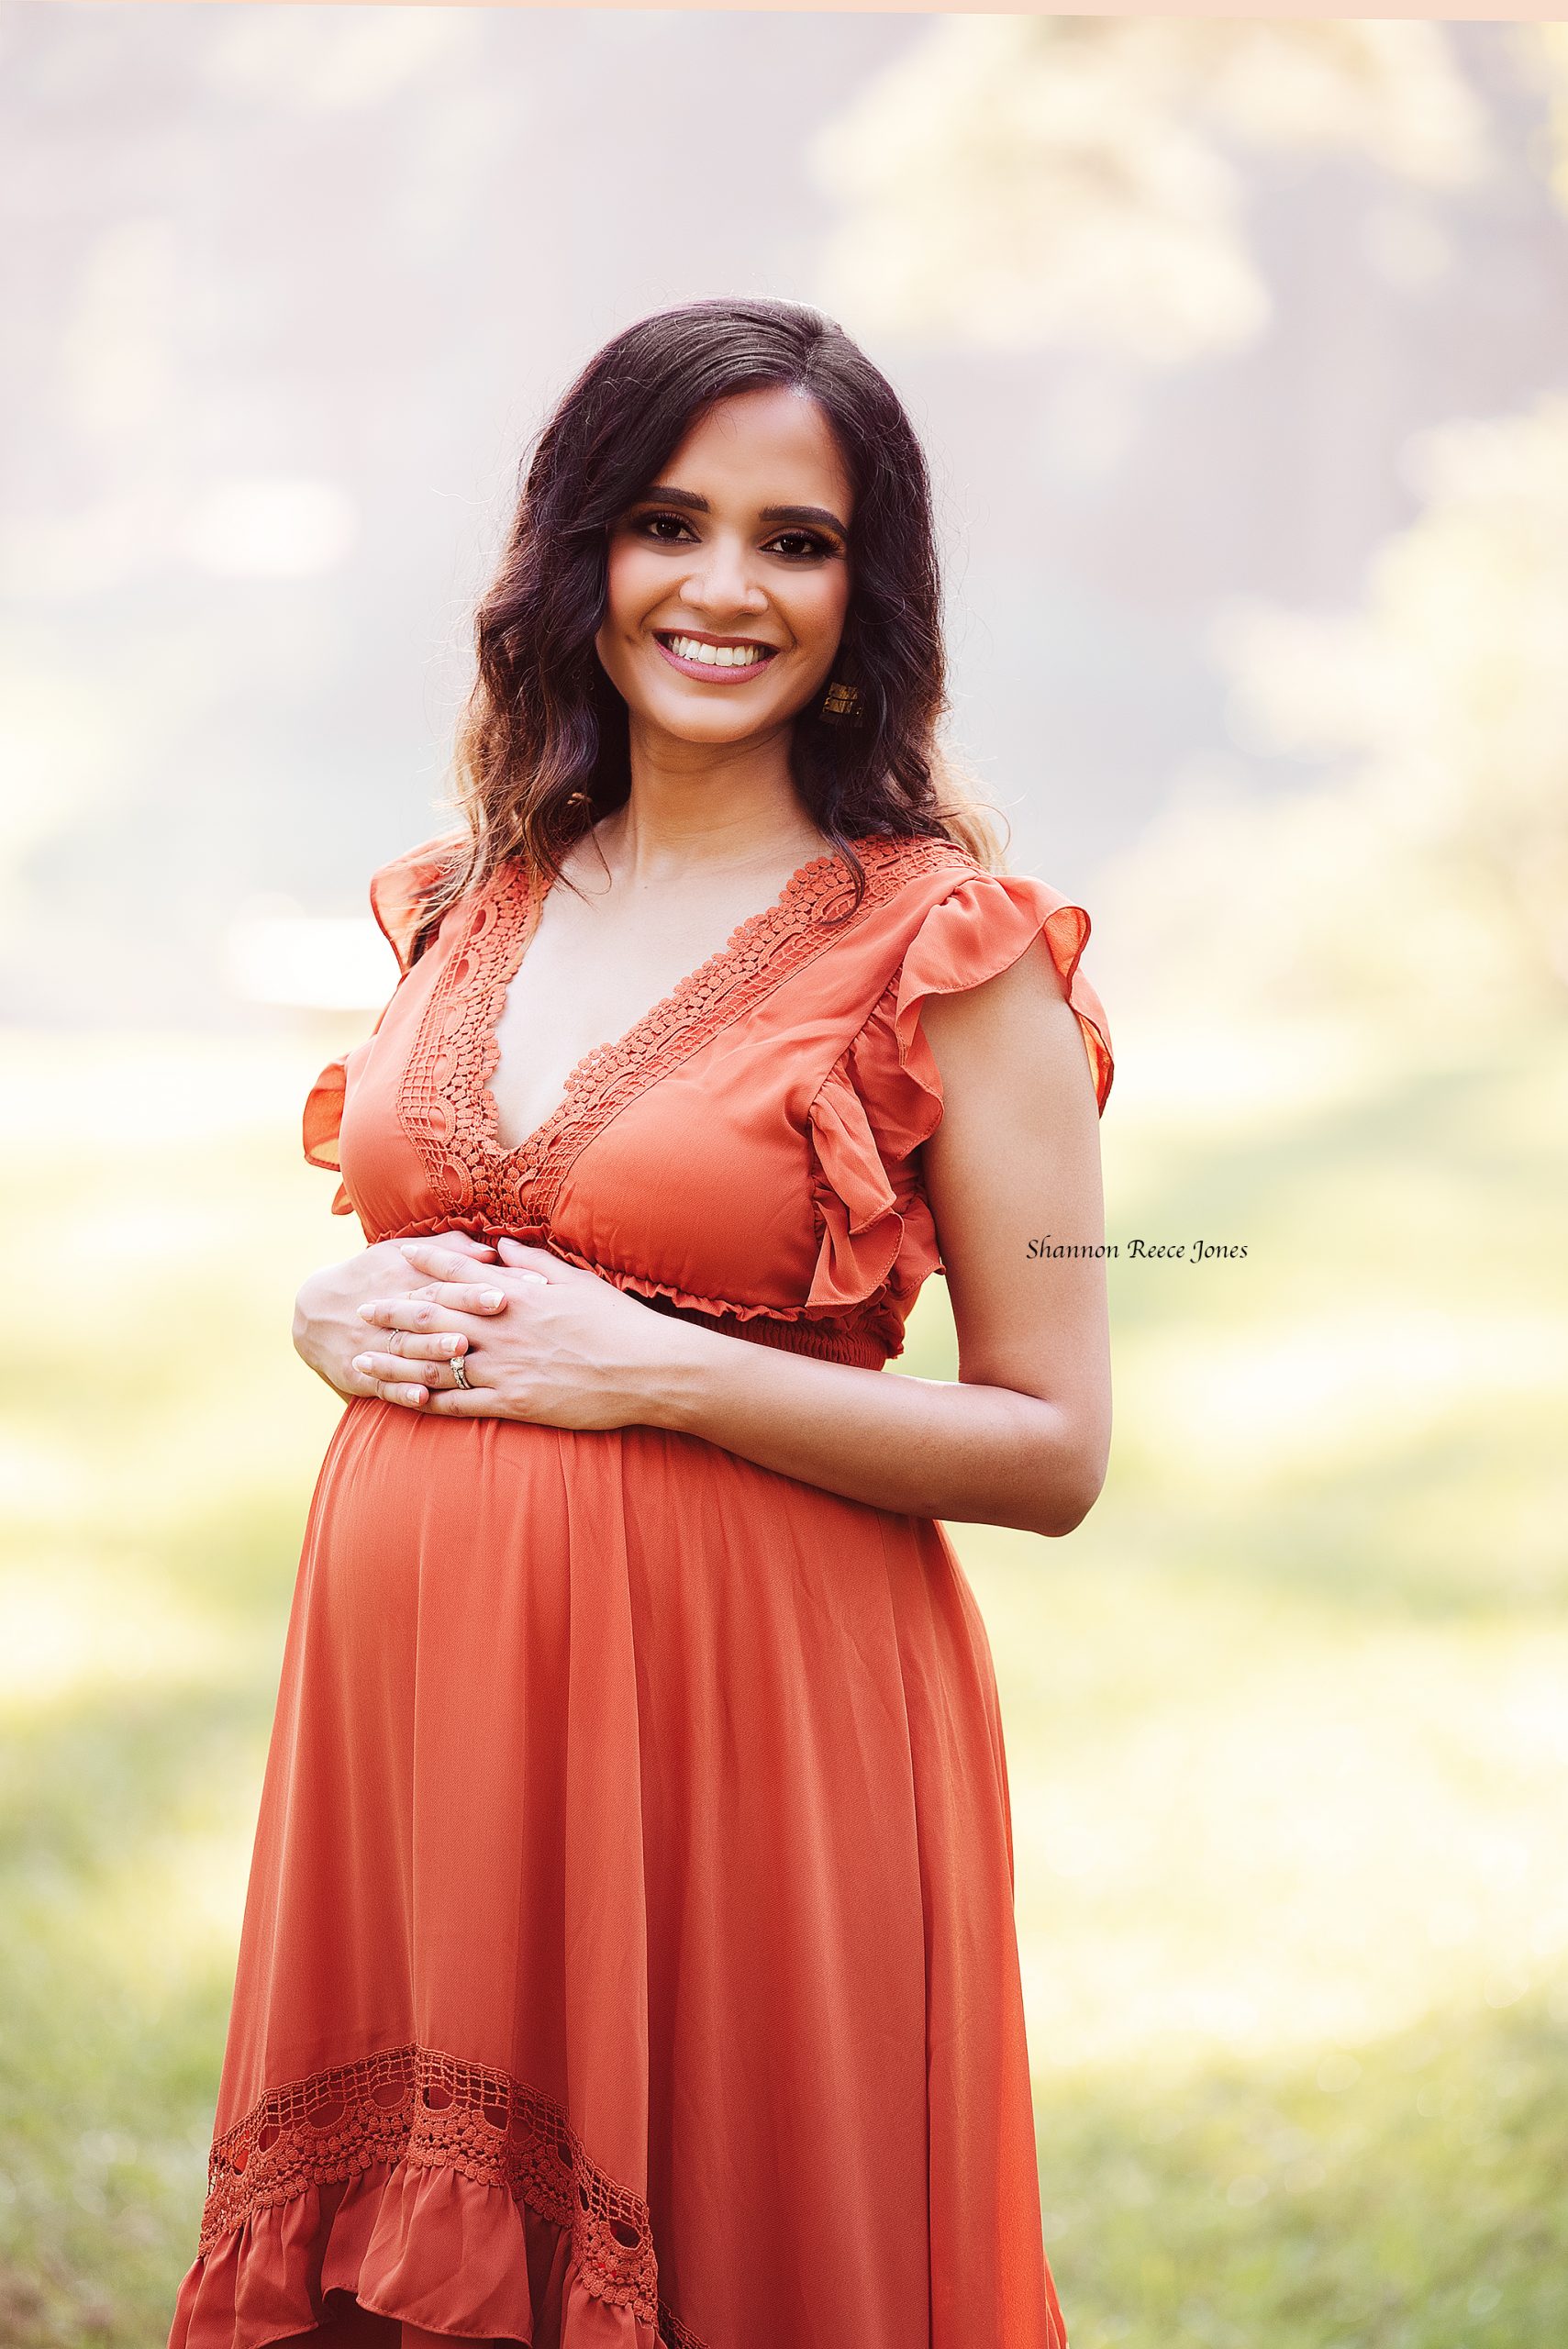 sunrise maternity session, best houston maternity photographers, woman in orange maternity gown outdoors